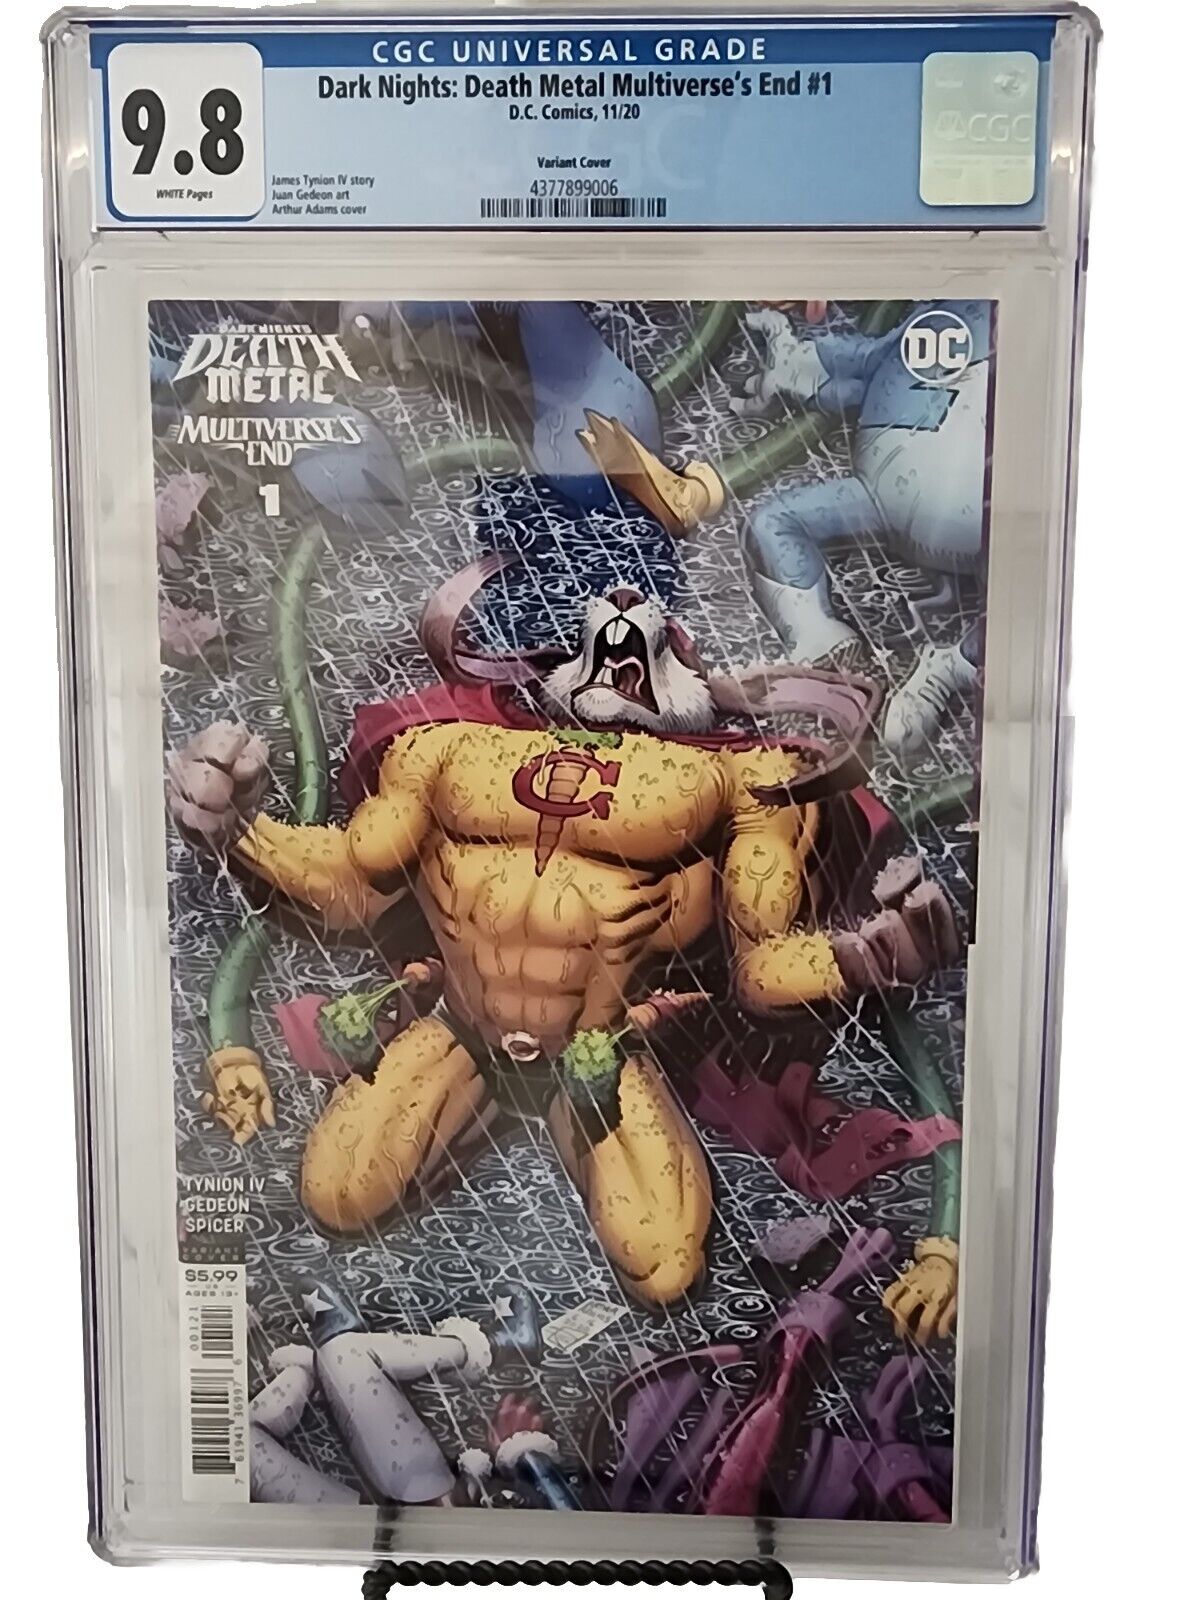 Dark Nights Death Metal Multiverse's End #1 CGC Graded 9.8 Variant Cover